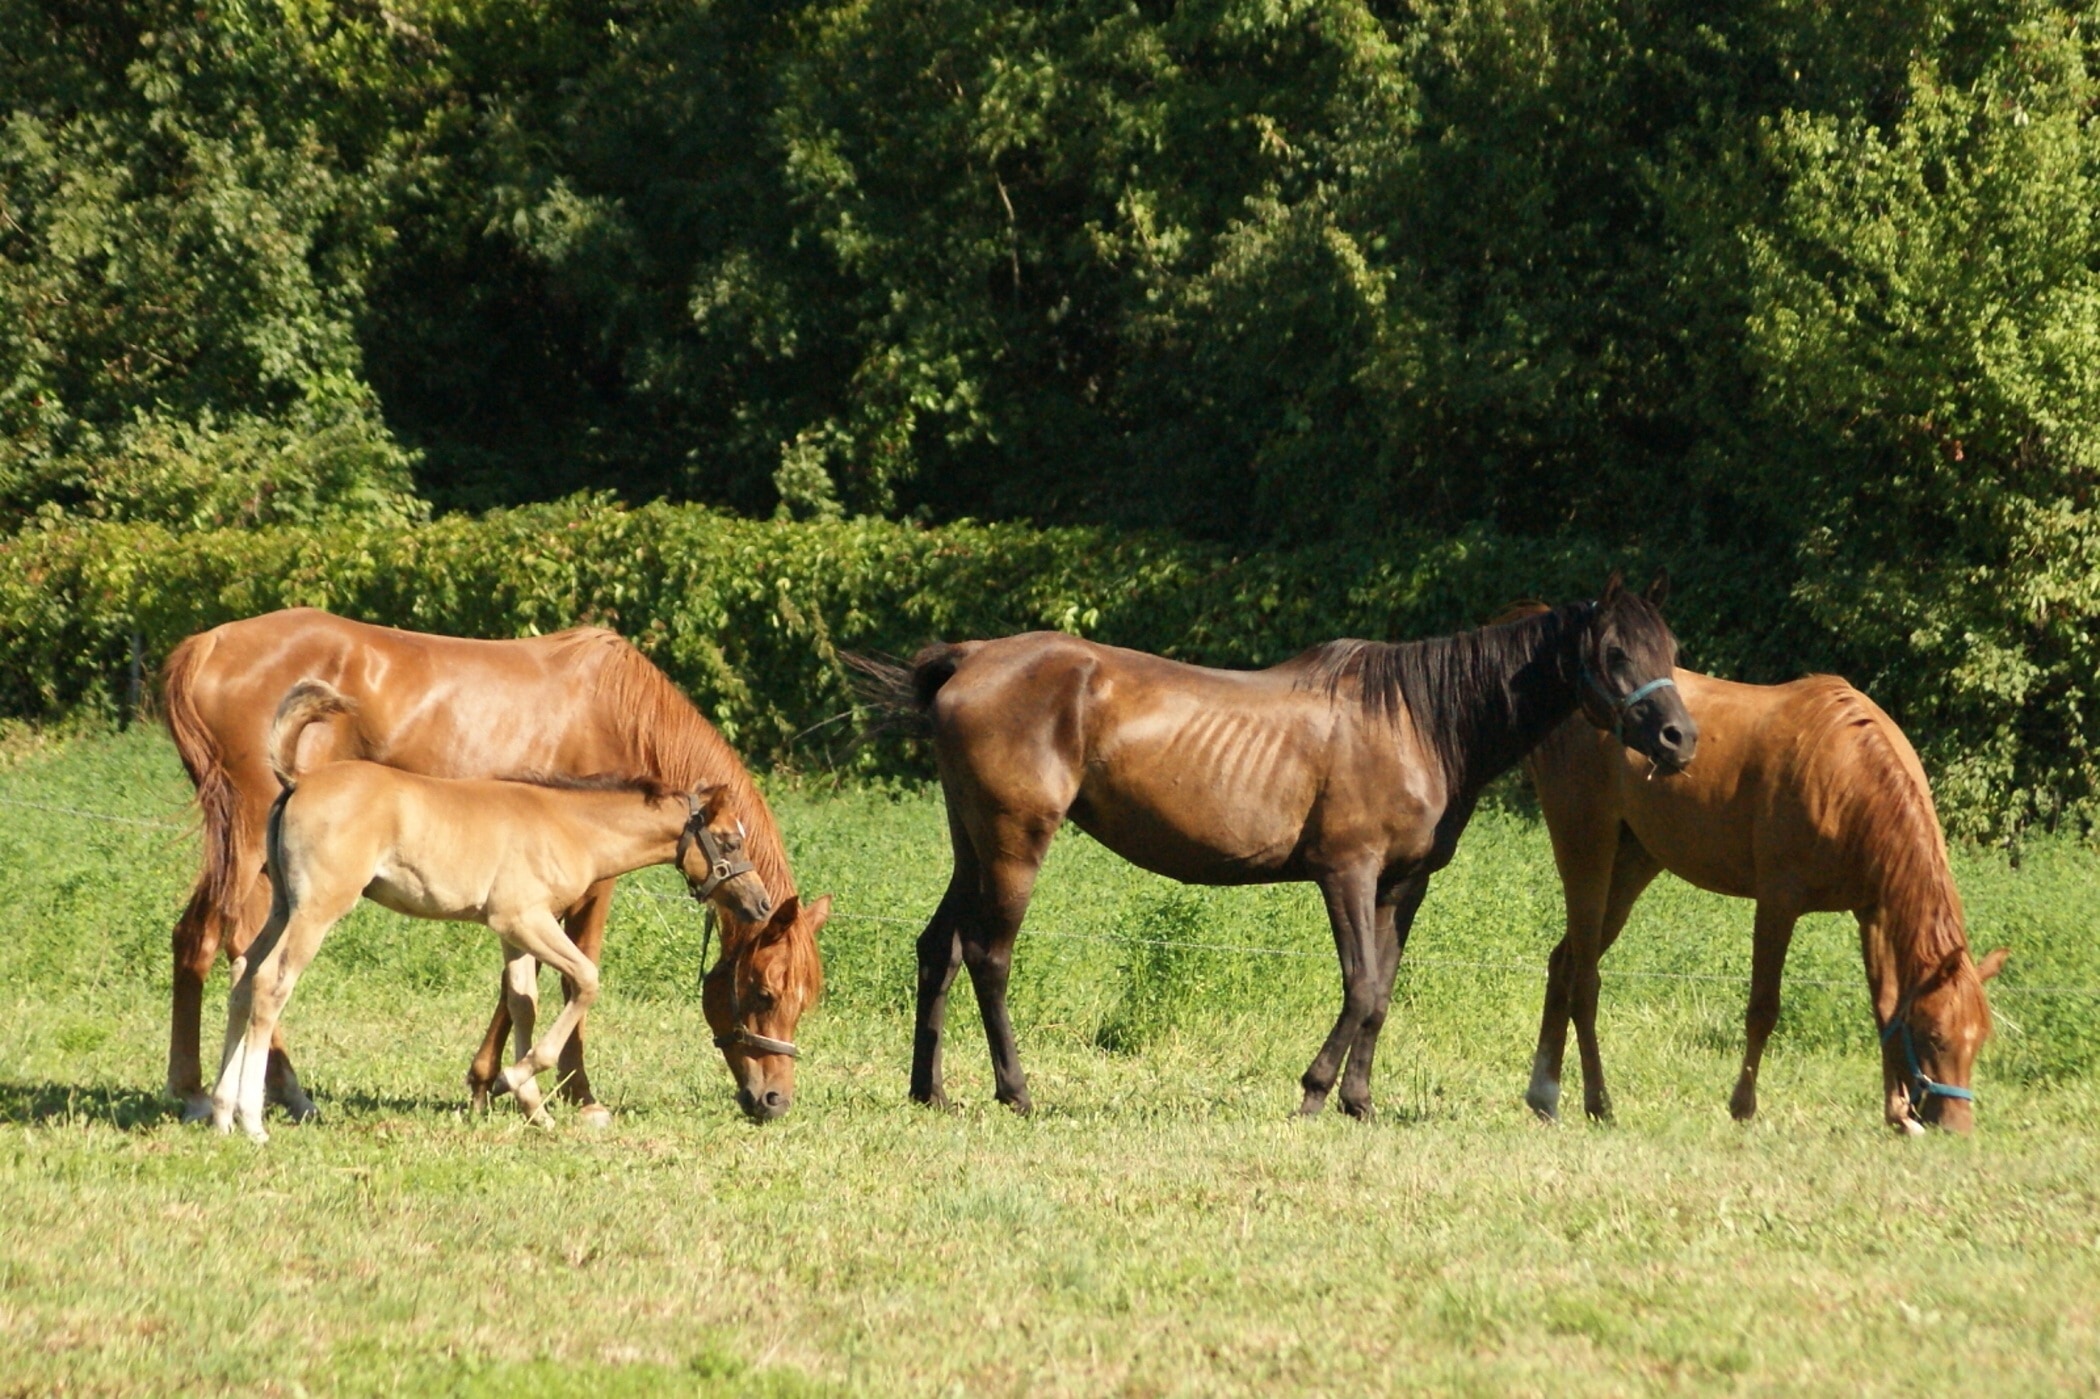 3 horse and 1 calf on green grass near trees at daytime